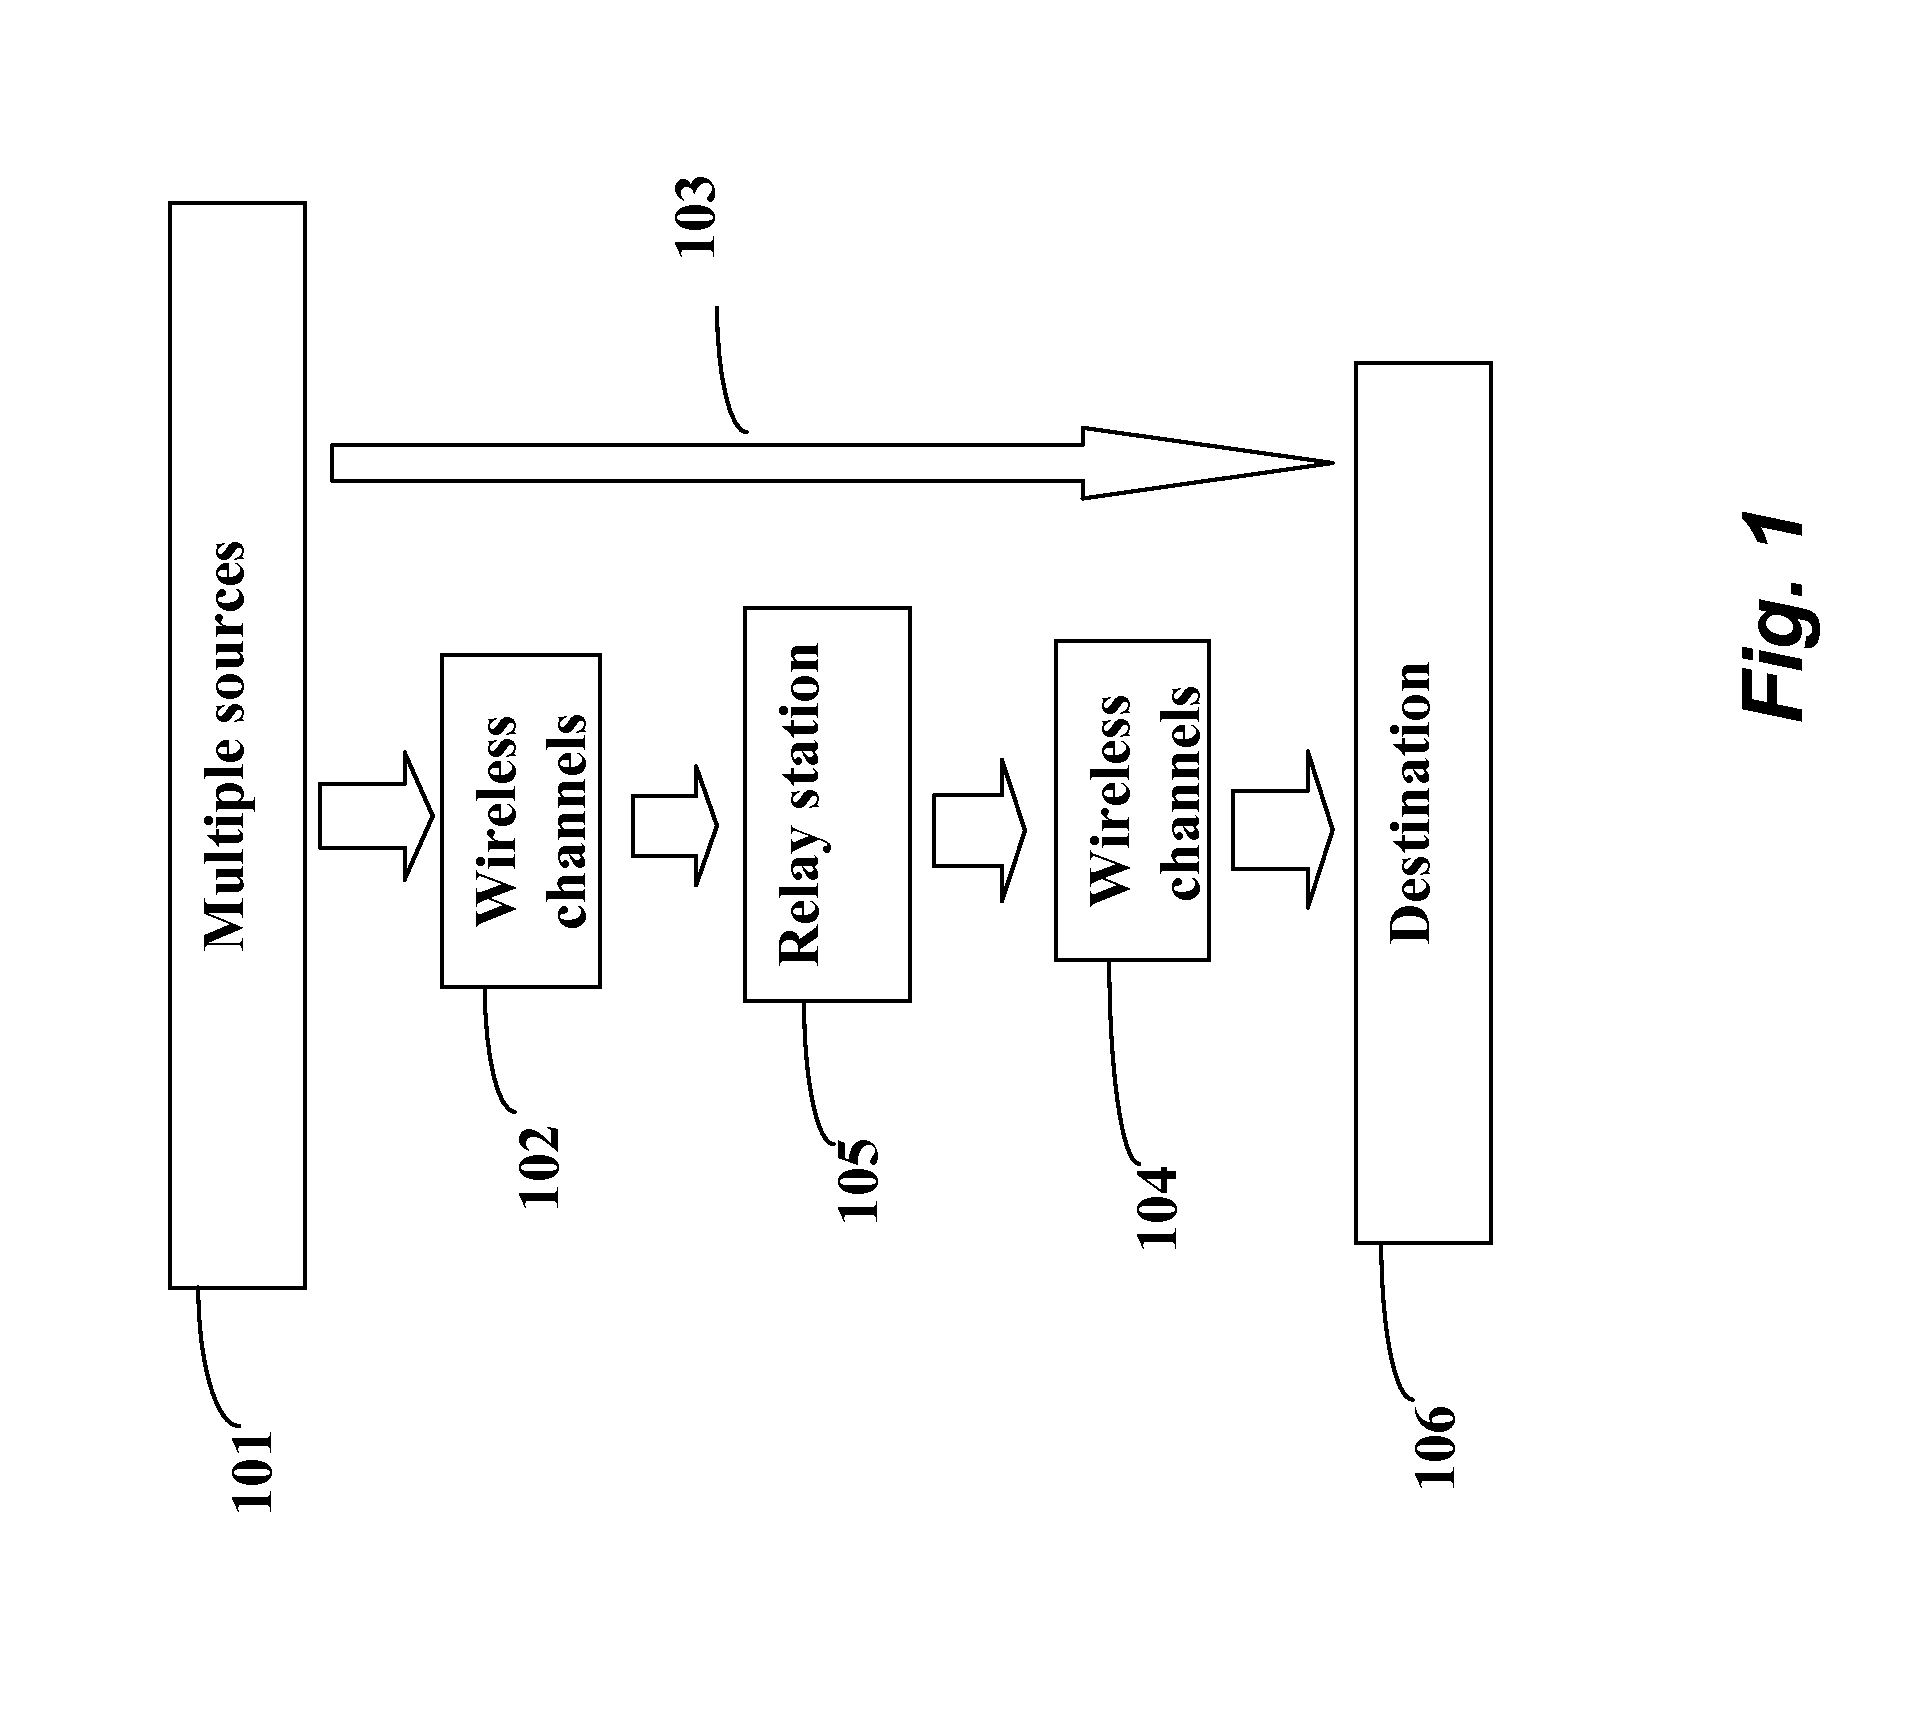 Relay Coded Multi-User Cooperative Communications for Uplink 4G Wireless Networks